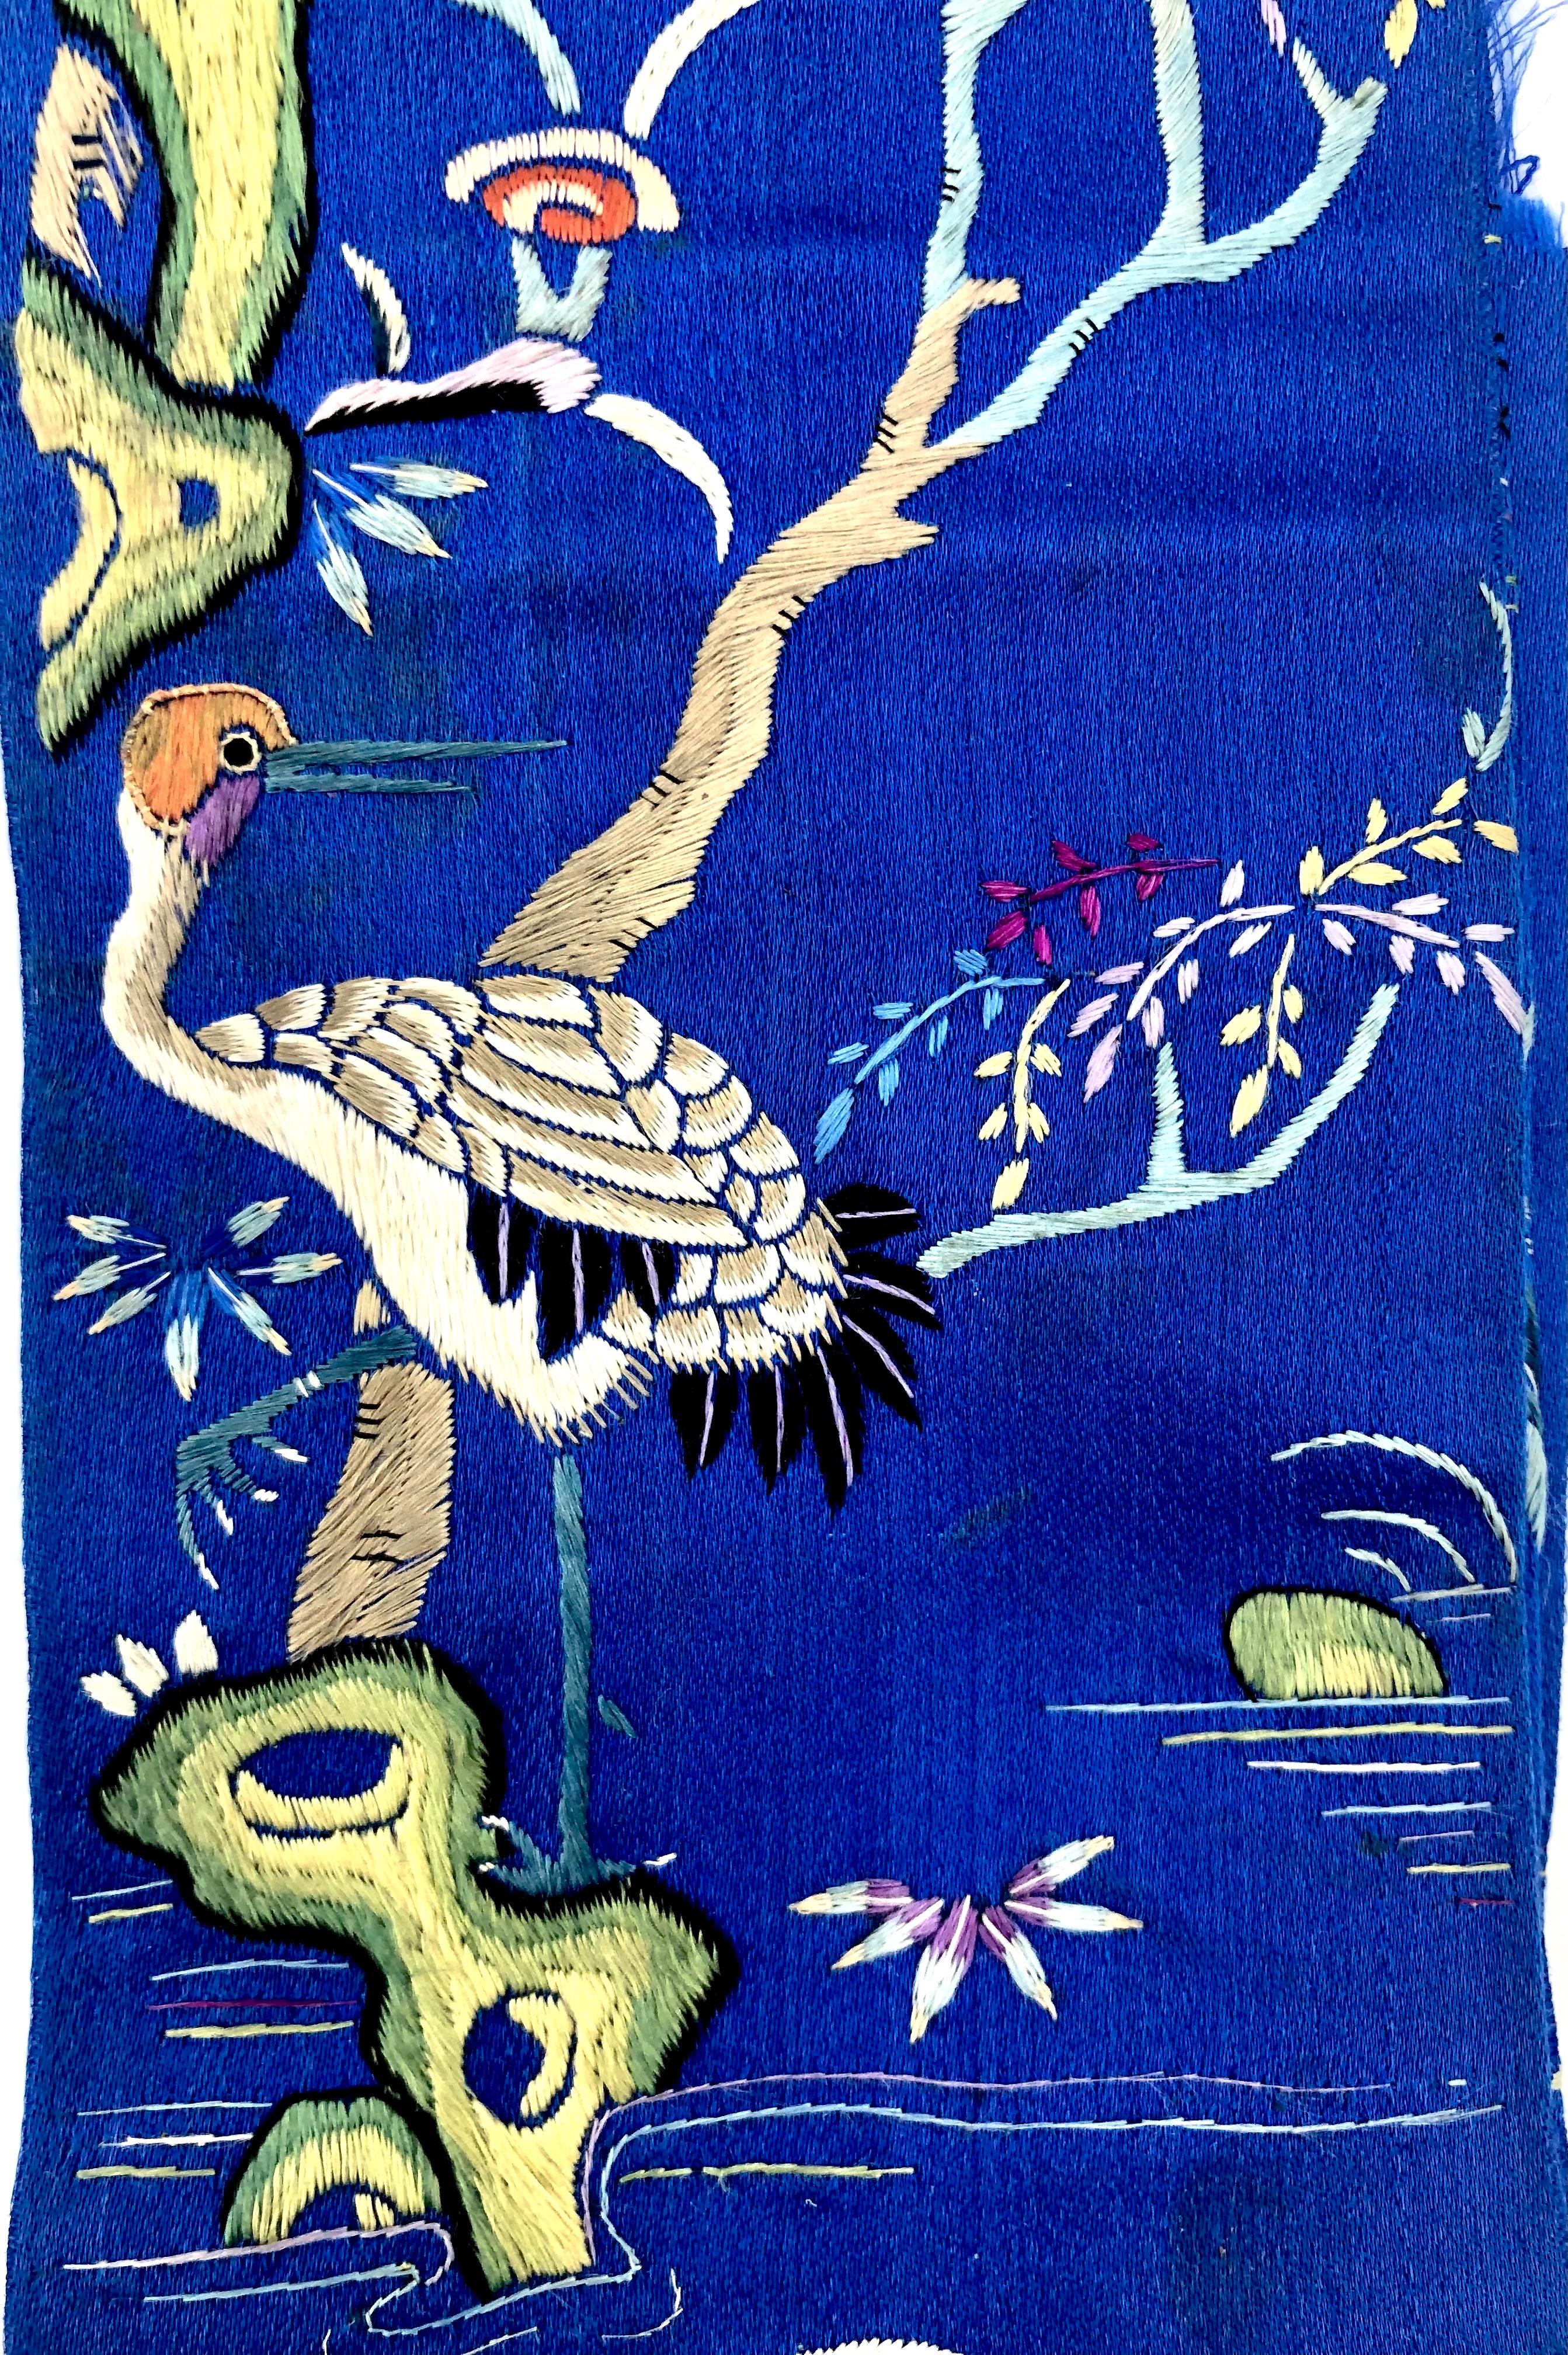 On wonderful bright blue silk we see two cranes looking at each other, peach trees with peach blossom, water with a softly ondulating pattern and lotus flowers.